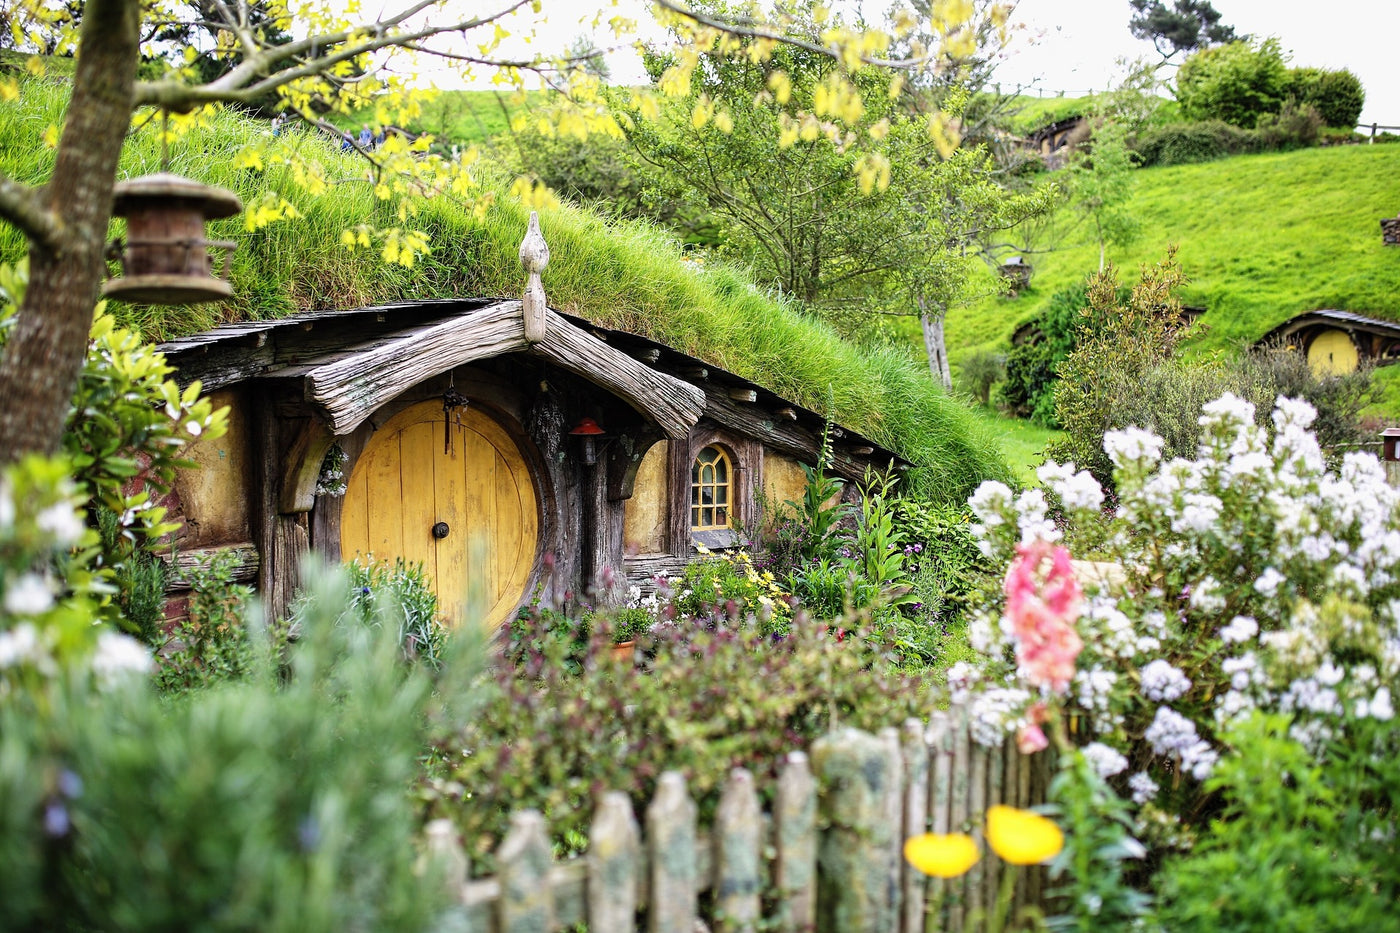 Hobbit Hole in the Shire with a Garden